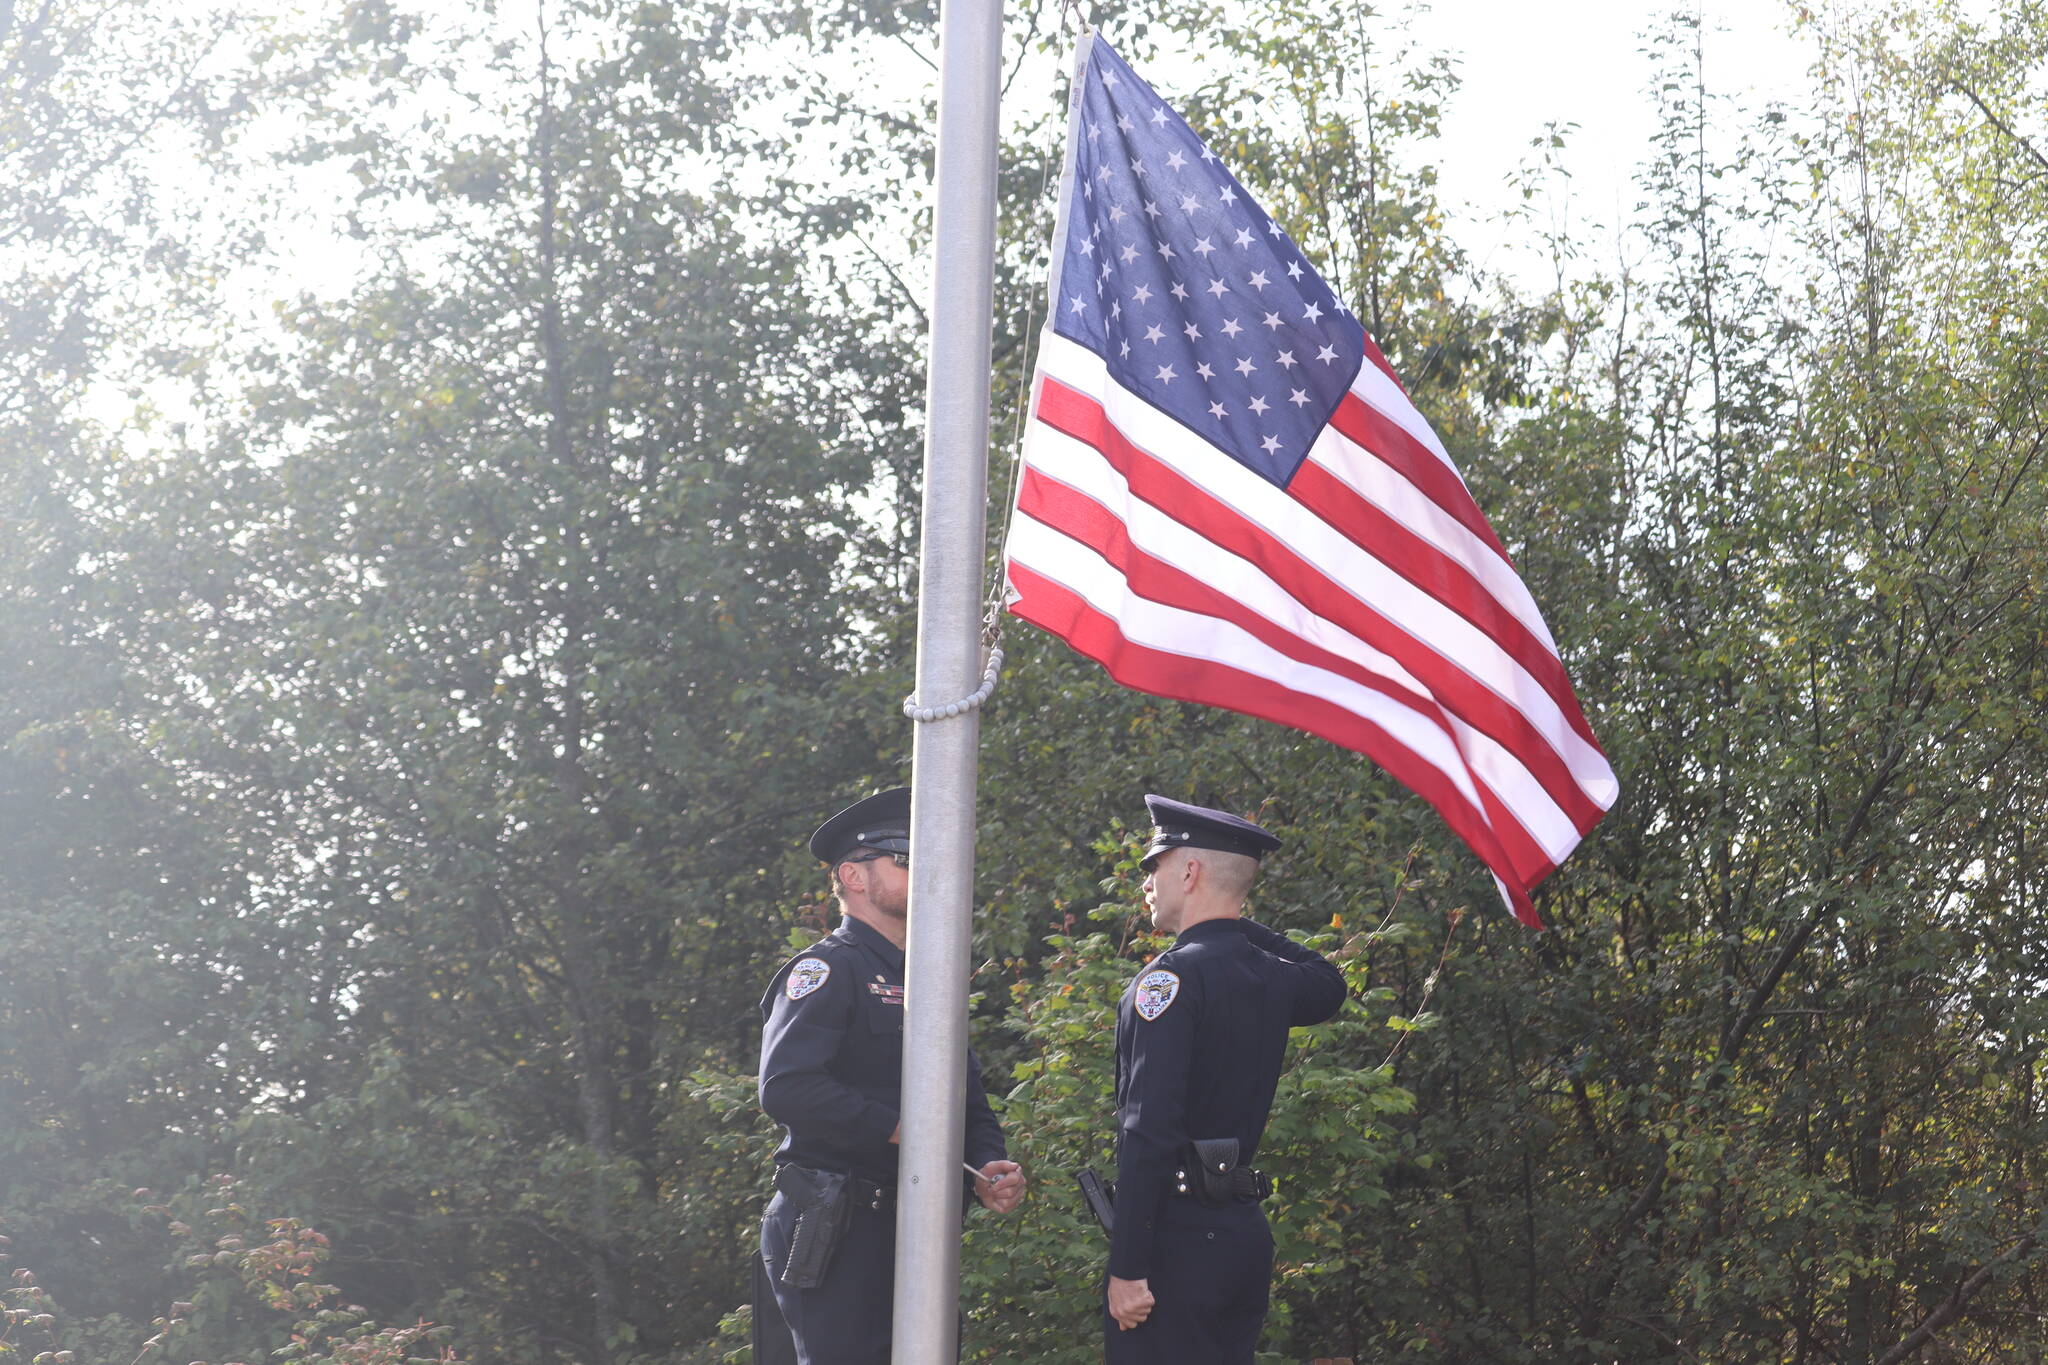 Juneau Police Department officers raised the flag at half mast at 9:58 a.m. on Sunday morning, as a way of remembering the exact time that the first plane struck the first World Trade Tower in New York on Sept. 11, 2001. (Jonson Kuhn / Juneau Empire)